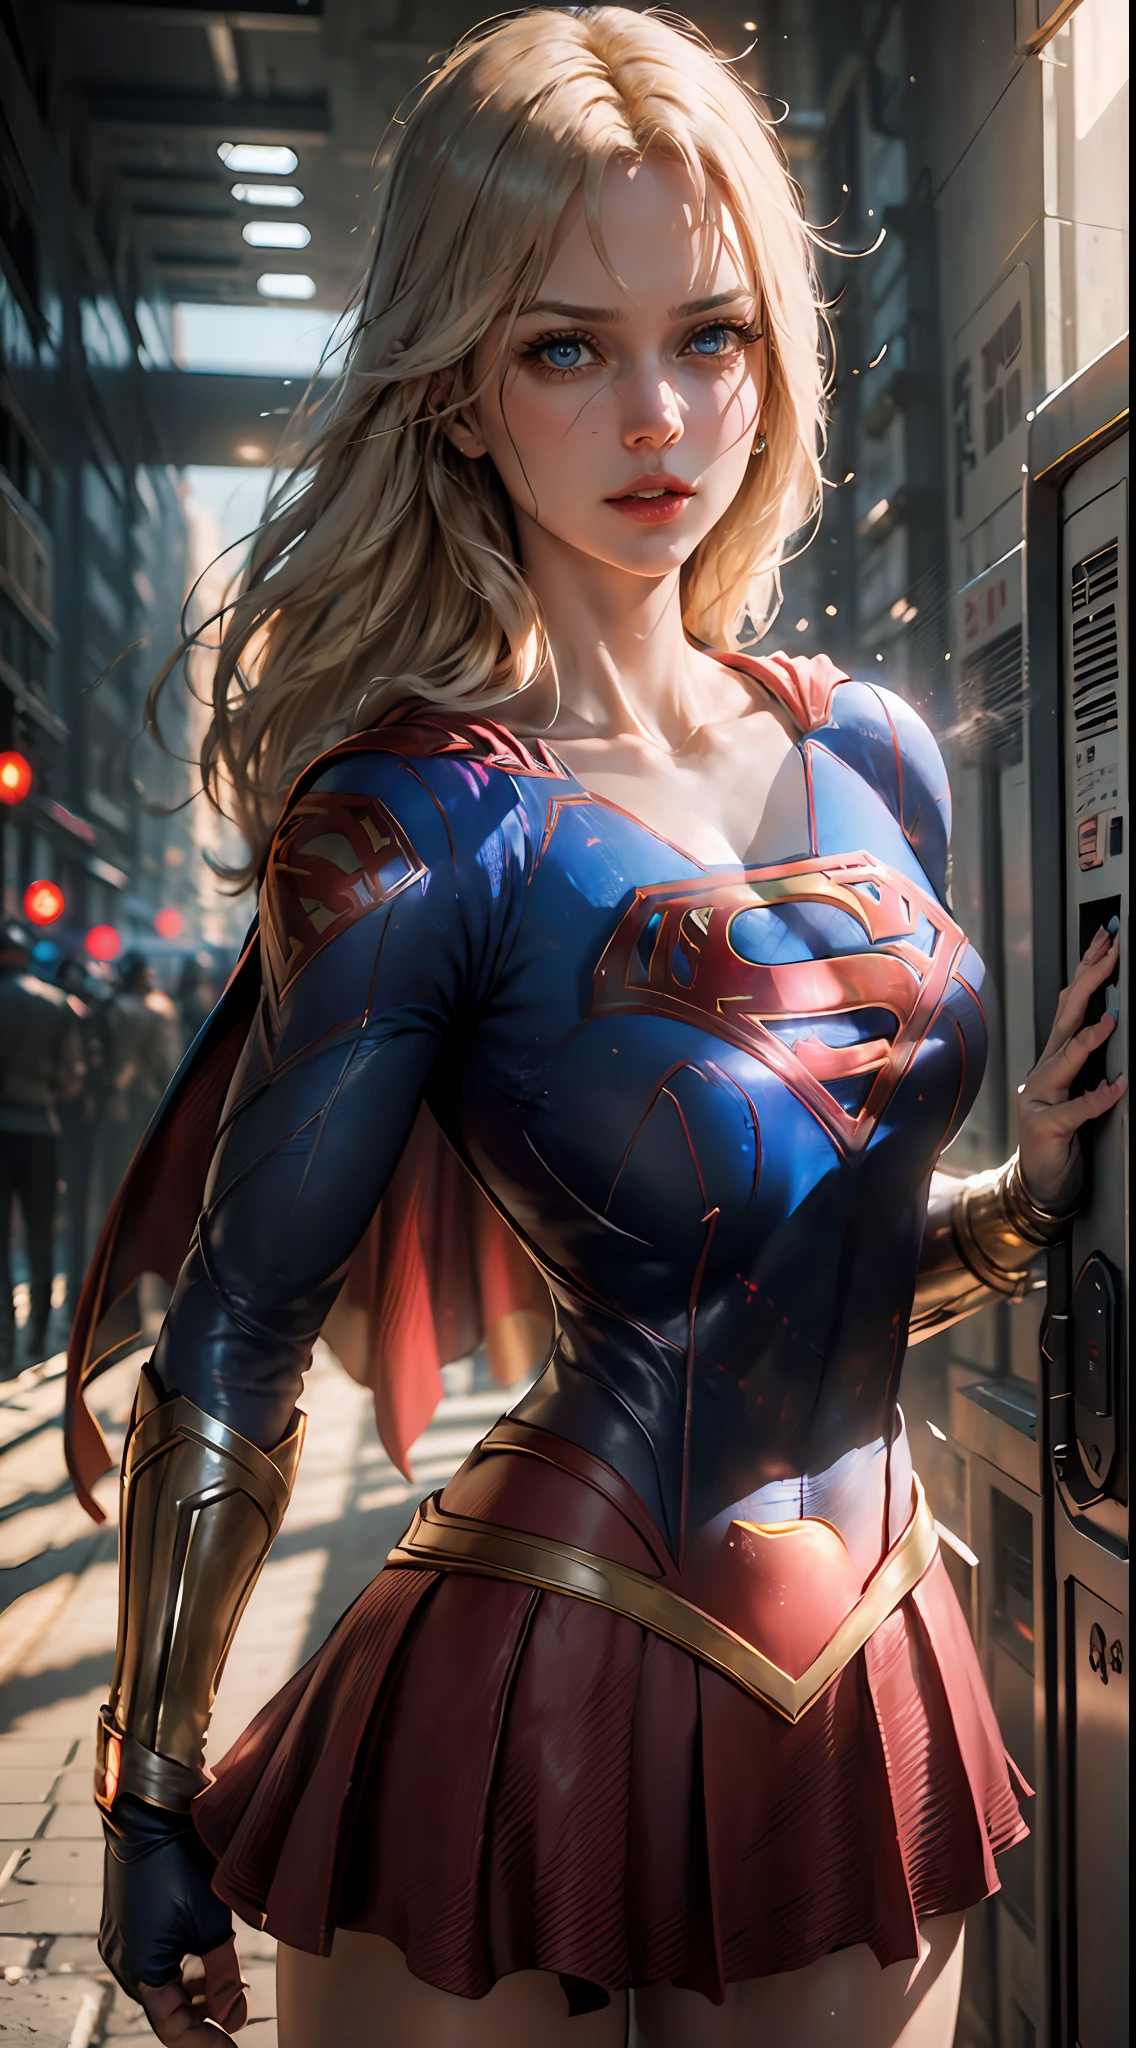 ((Best Supergirl Quality)), ((masterpiece)), (detailed: 1.4), 3D, an image of a beautiful blonde woman with cyberpunk blue eyes,HDR (High Dynamic Range),Ray Tracing,NVIDIA RTX,Super-Resolution,Unreal 5,Subsurface Dispersion, PBR Texture, Post-processing, Anisotropic filtering, Depth of field, Maximum clarity and sharpness, Multilayer textures, Albedo and specular maps, Surface shading, Accurate simulation of light-material interaction,  Perfect Proportions, Octane Render, Two-Tone Lighting,Wide Aperture,Low ISO,White Balance,Rule of Thirds,8K RAW, Using Superman S symbol on Chest.